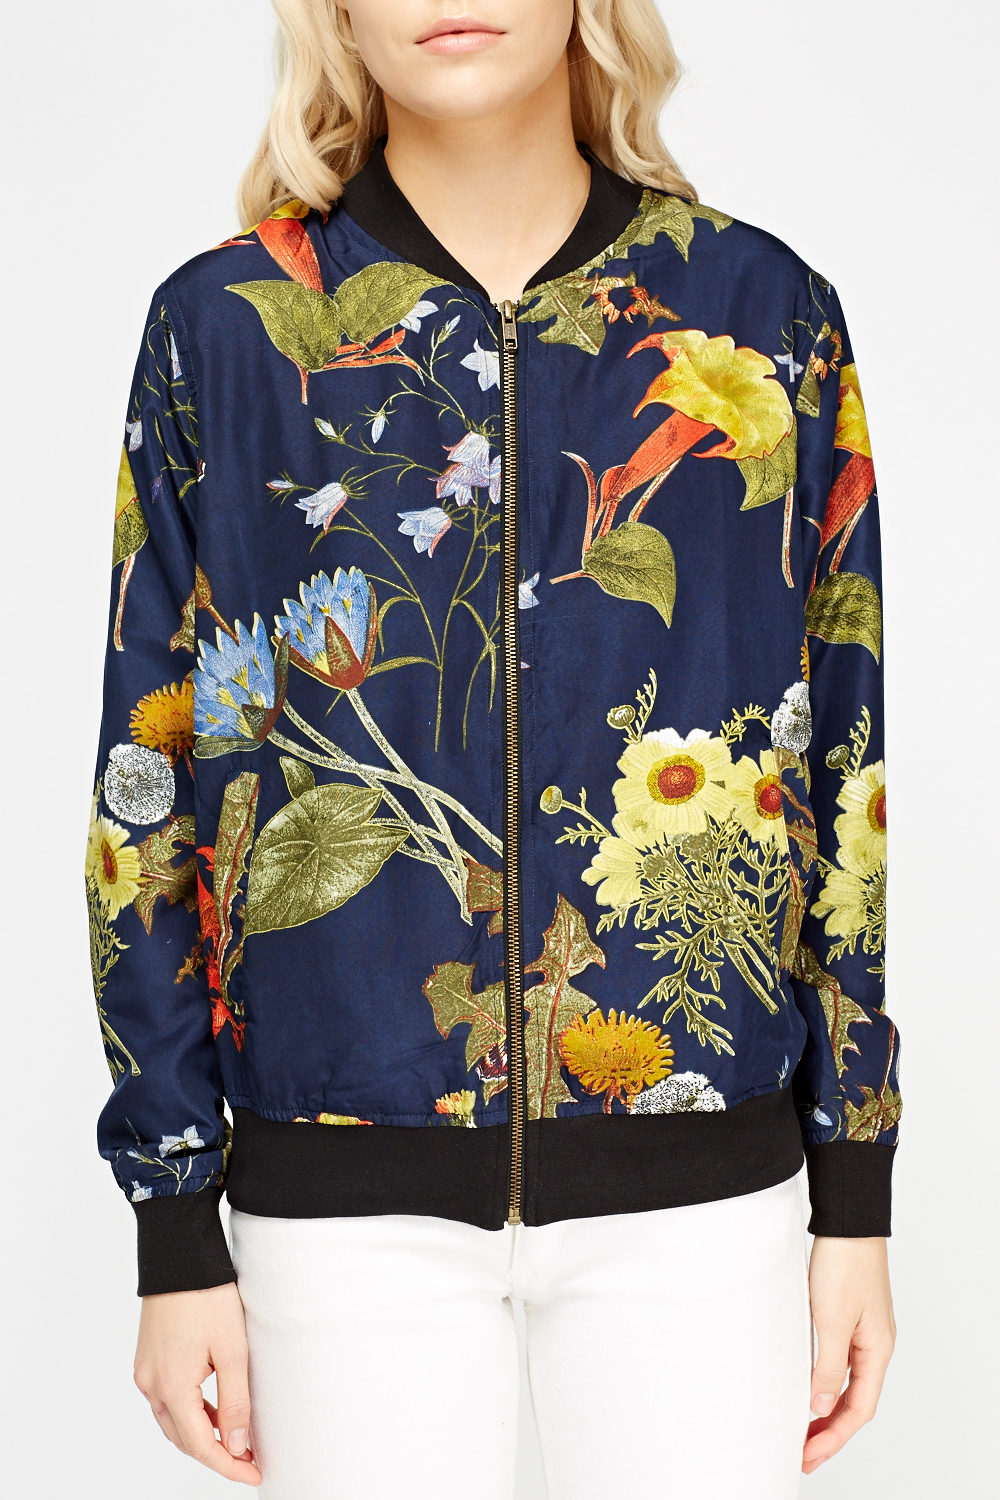 Download Light Weight Floral Bomber Jacket - Just $7